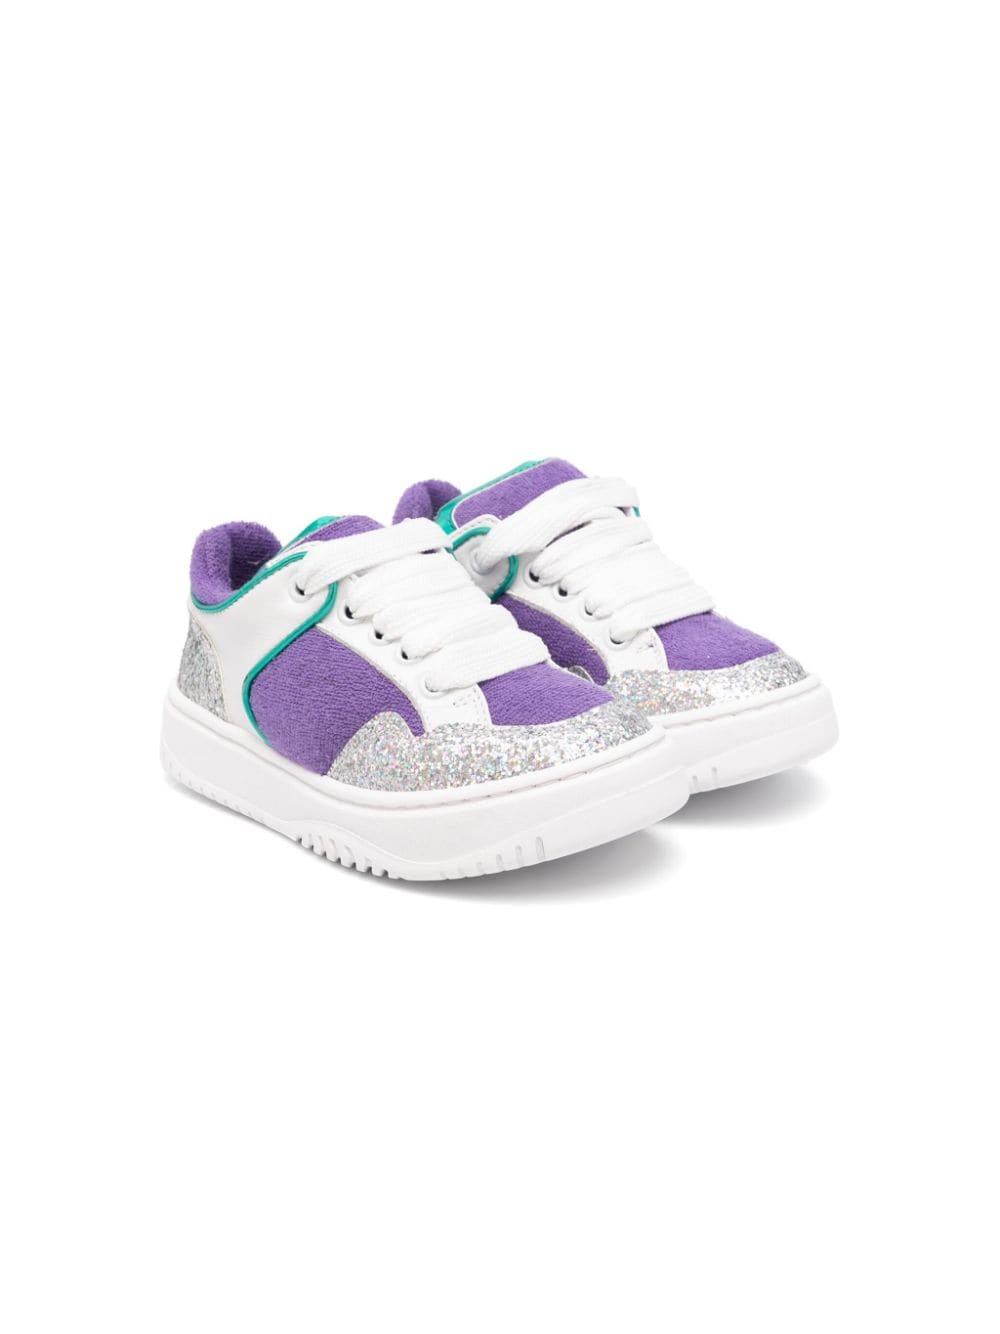 Andrea Montelpare Kids' Terry-cloth Glittered Trainers In Purple